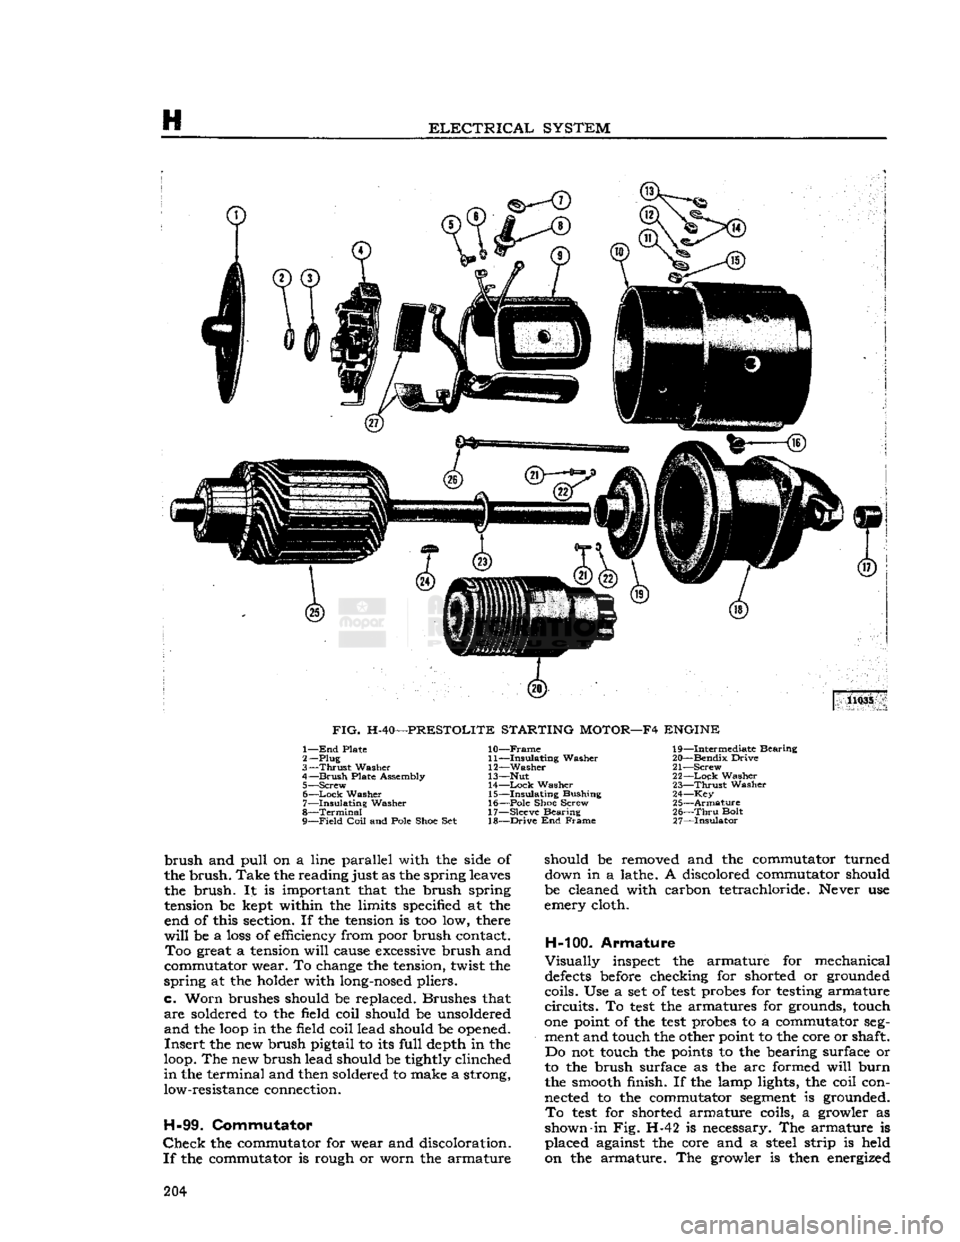 JEEP CJ 1953 Owners Manual 
H 

ELECTRICAL
 SYSTEM 

11035 

FIG.
 H-40—PRESTOLITE STARTING MOTOR—F4 ENGINE  1— End
 Plate 

2—
 Plug 

3—
 Thrust
 Washer 
4—
 Brush
 Plate Assembly  5— Screw 
6—
 —Lock
 Washe